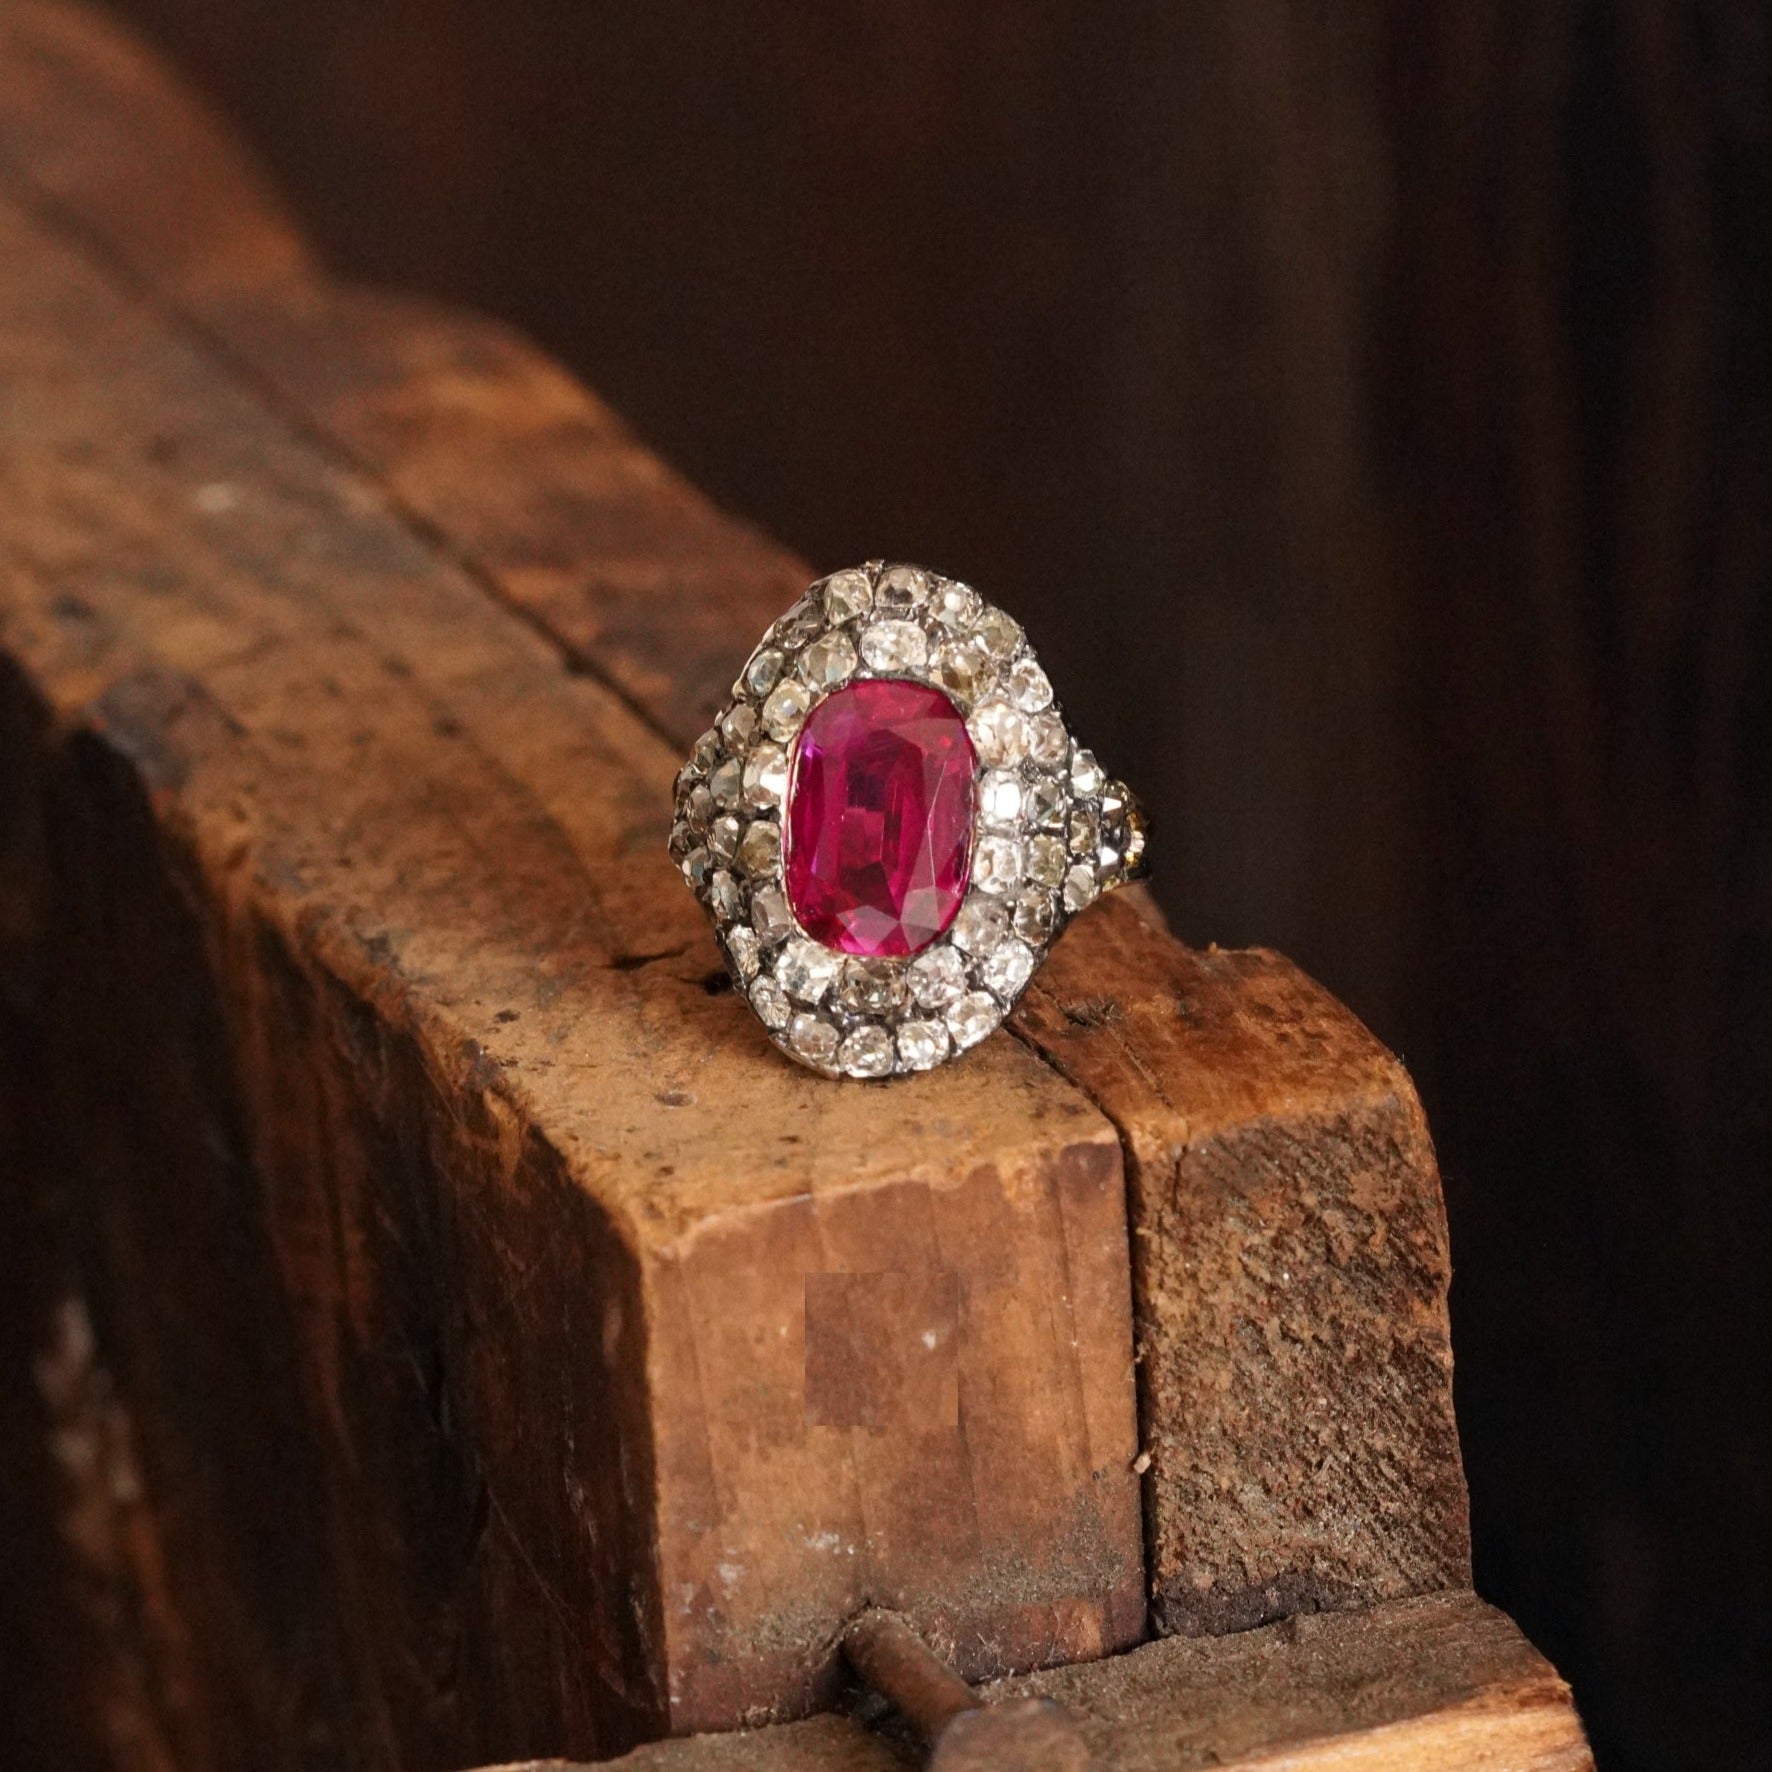 Jogani collection Exquisite Georgian Era Ring with a Glowing 3.12 CT No Heat Burmese Ruby and Lustrous 